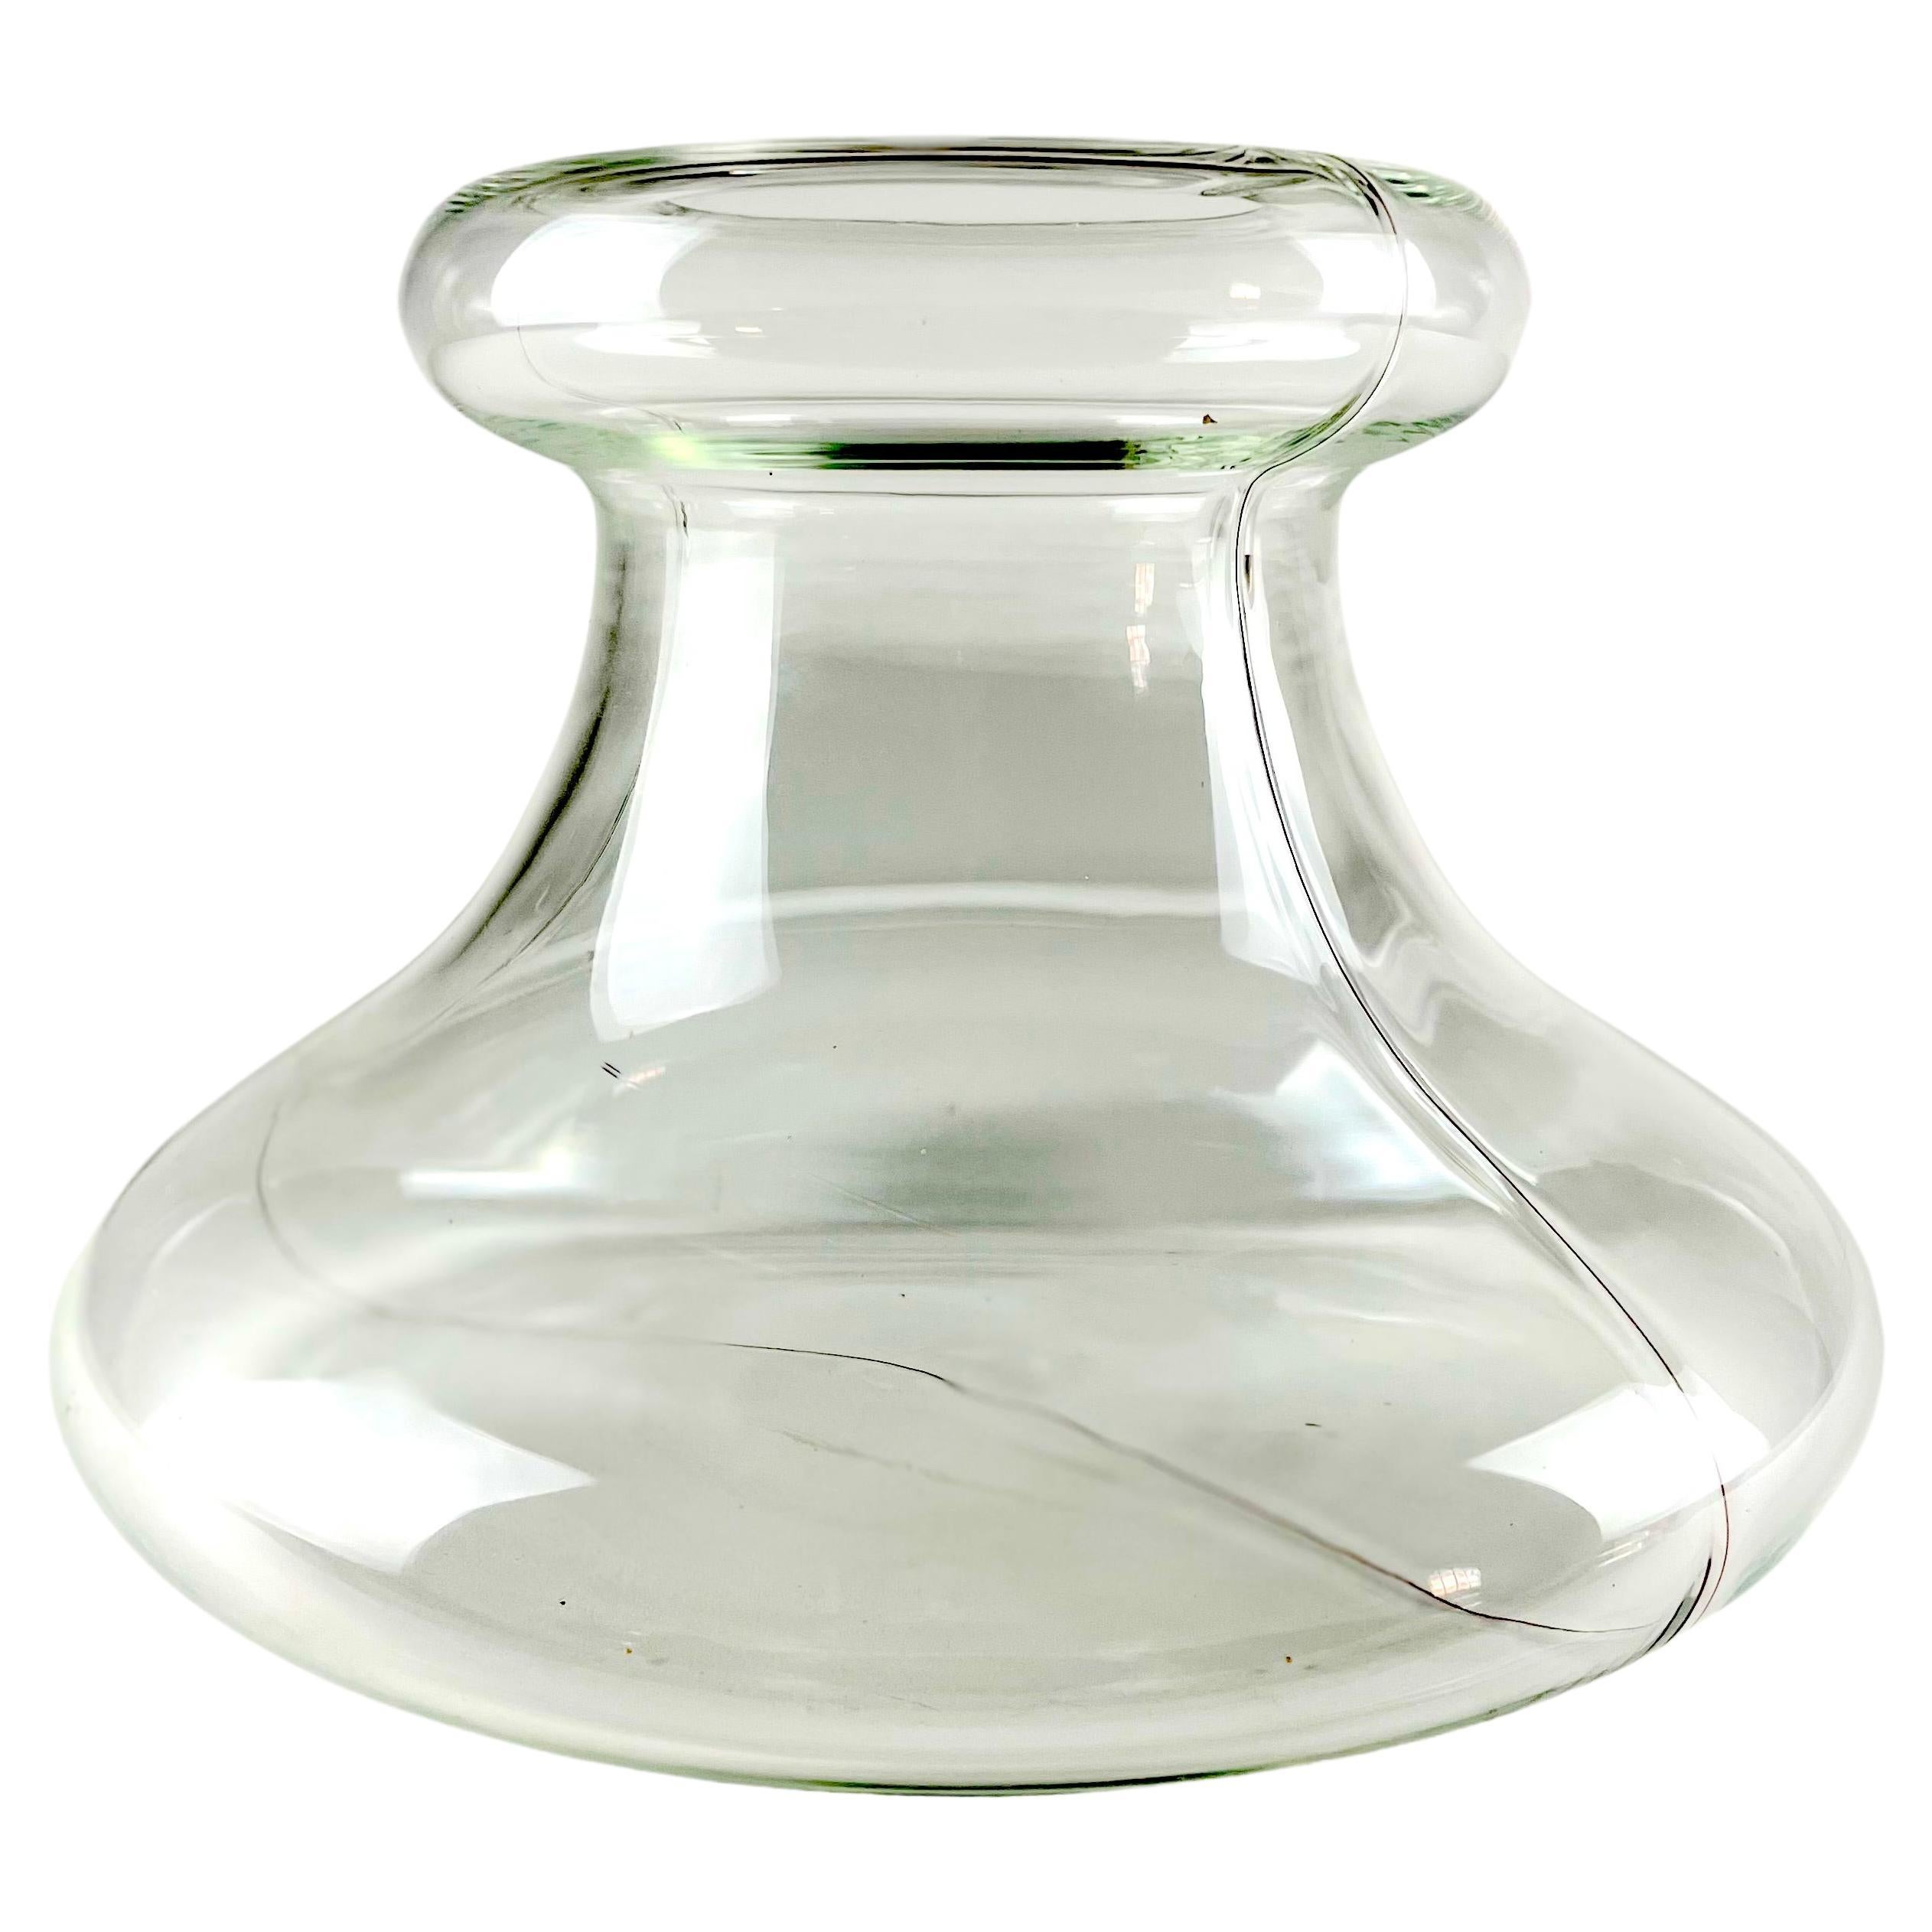 PARTY, crystal vase by Renato Toso for FRATELLI TOSO MURANO, 1970 circa